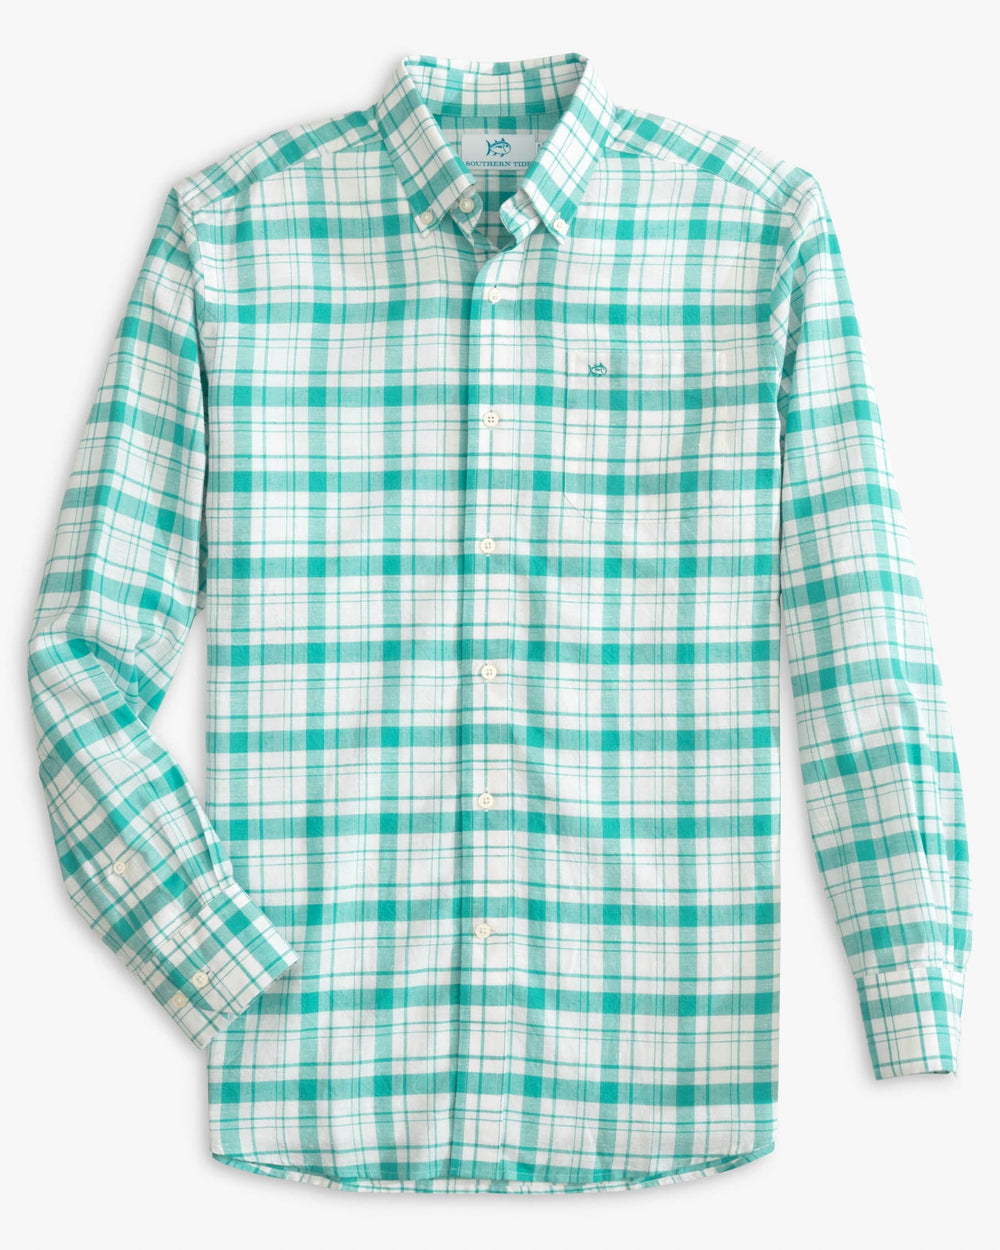 The front view of the Southern Tide Headland Moultire Plaid Long Sleeve Sport Shirt by Southern Tide - Tidal Wave